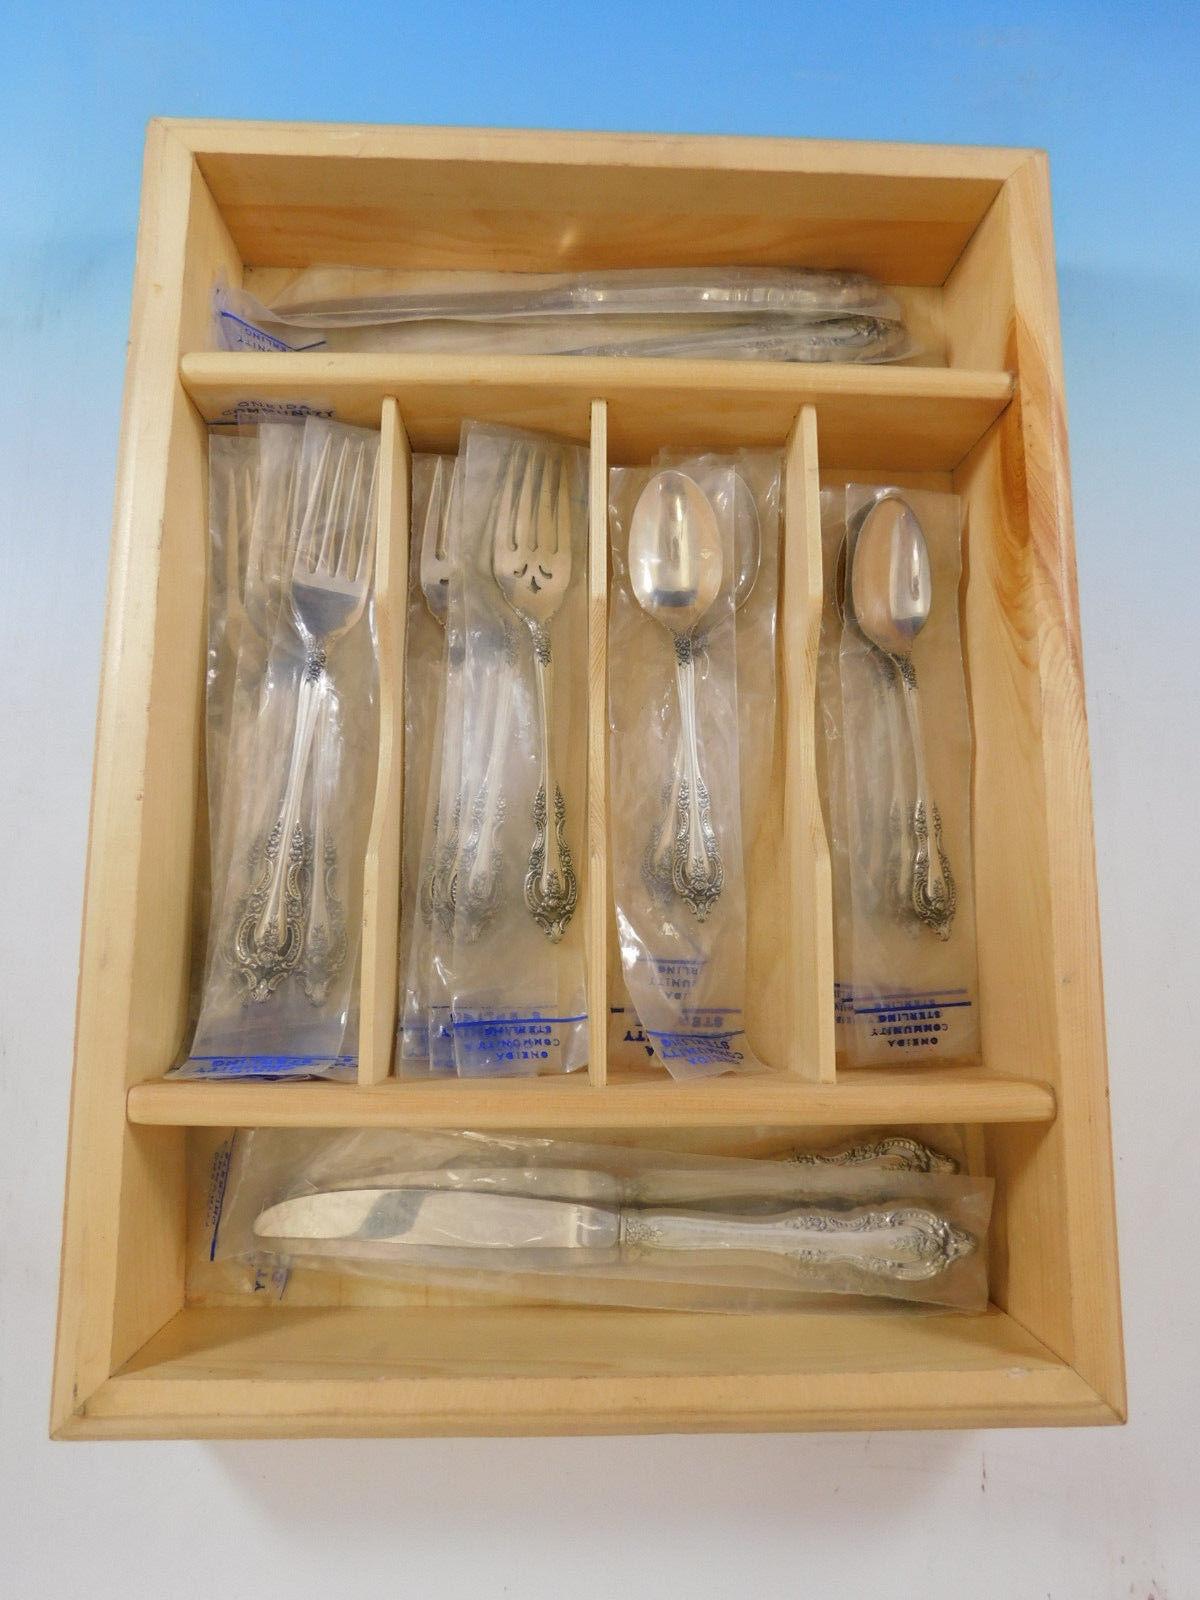 New, unused Mediterranea by Oneida Sterling Silver flatware set, 24 pieces. Great starter set! This set includes:

6 Knives, 9 1/8